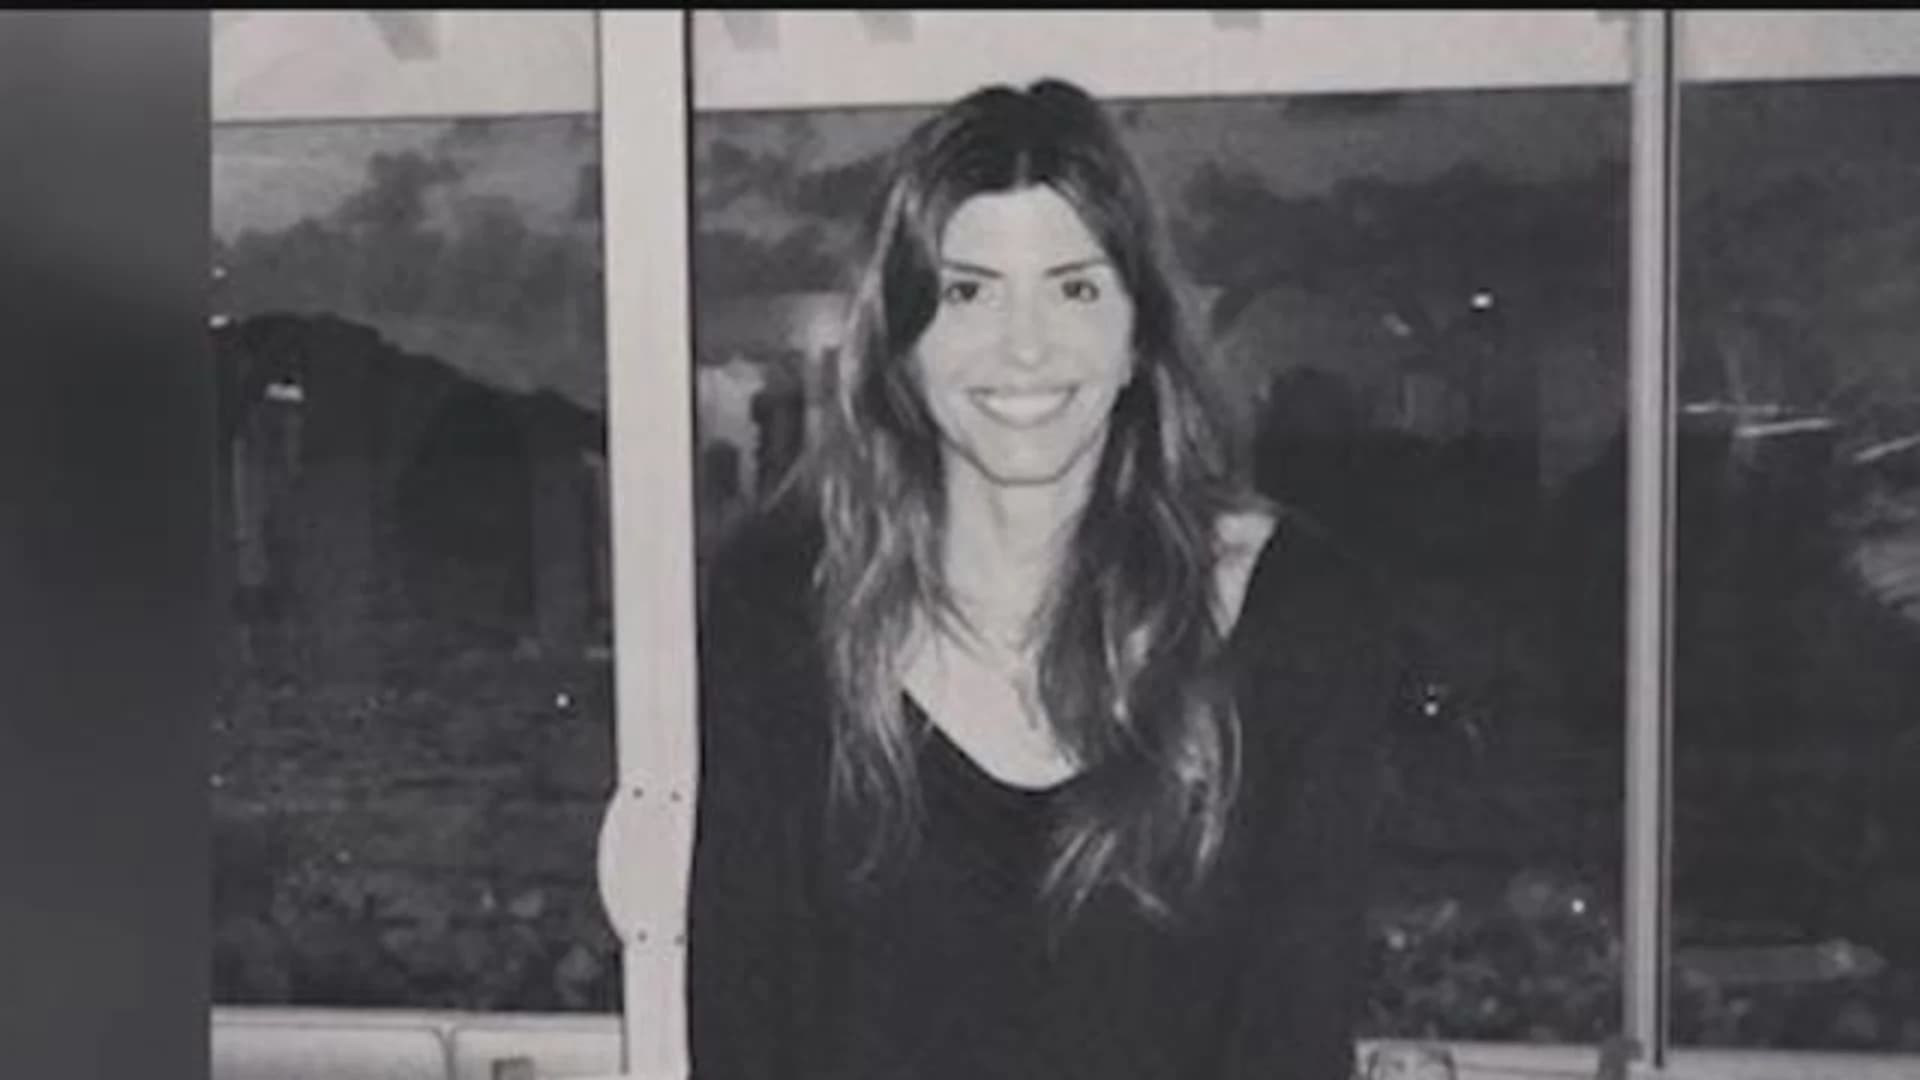 The search for answers in the Jennifer Dulos case